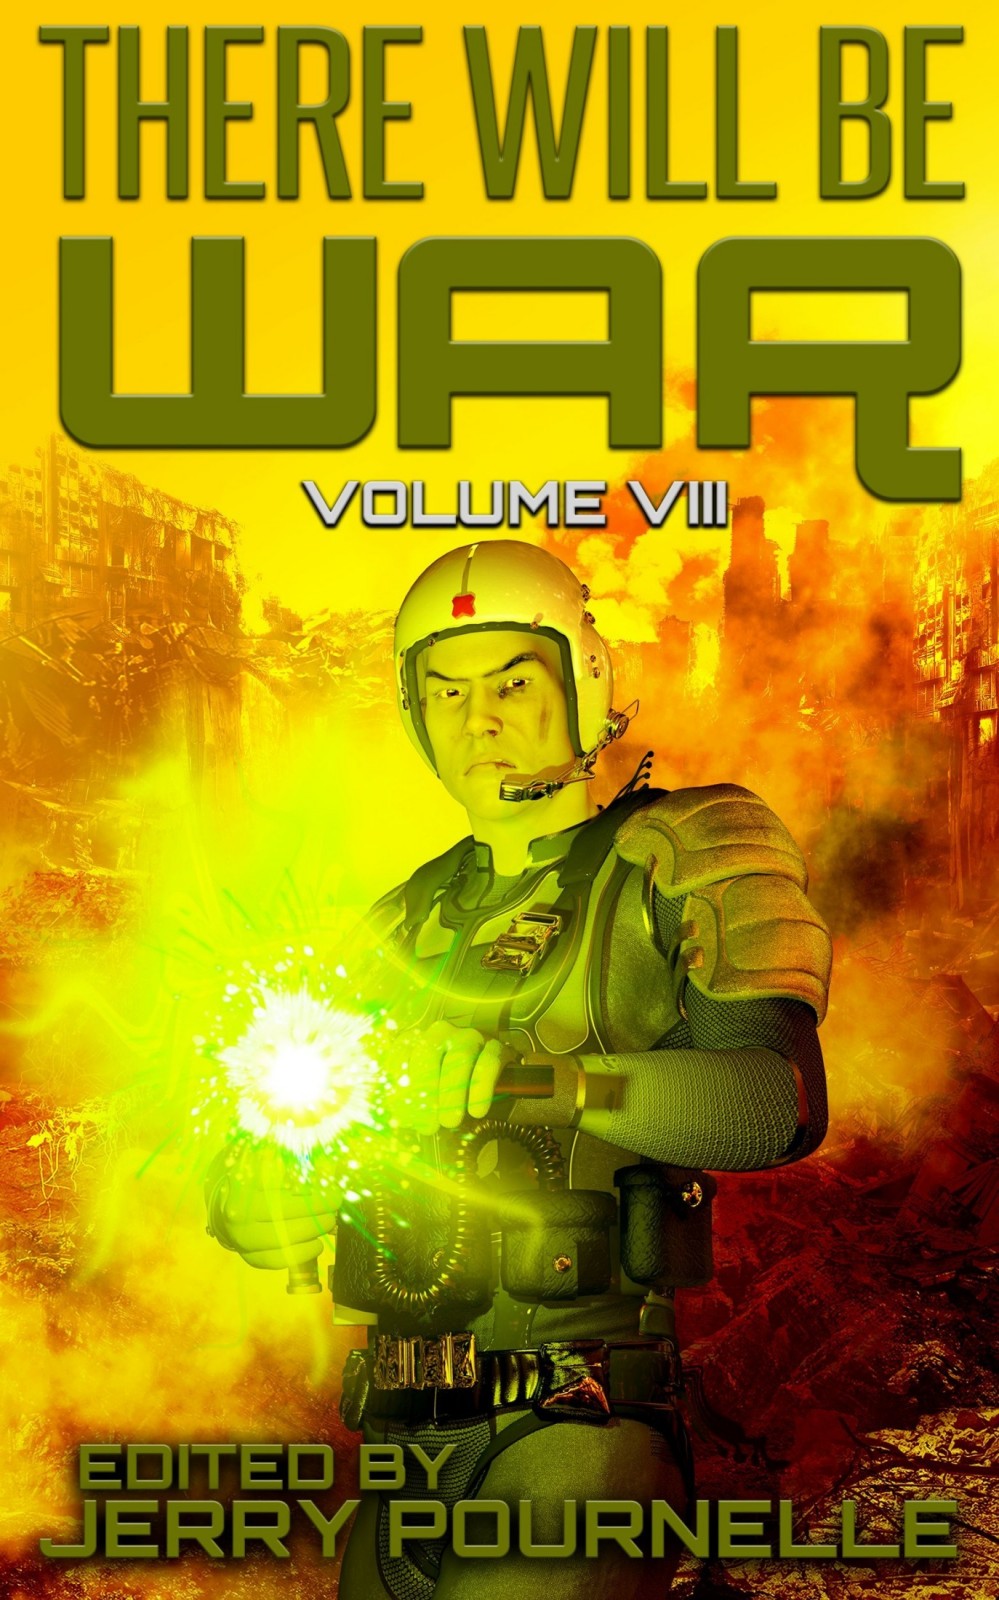 There Will Be War Volume VIII